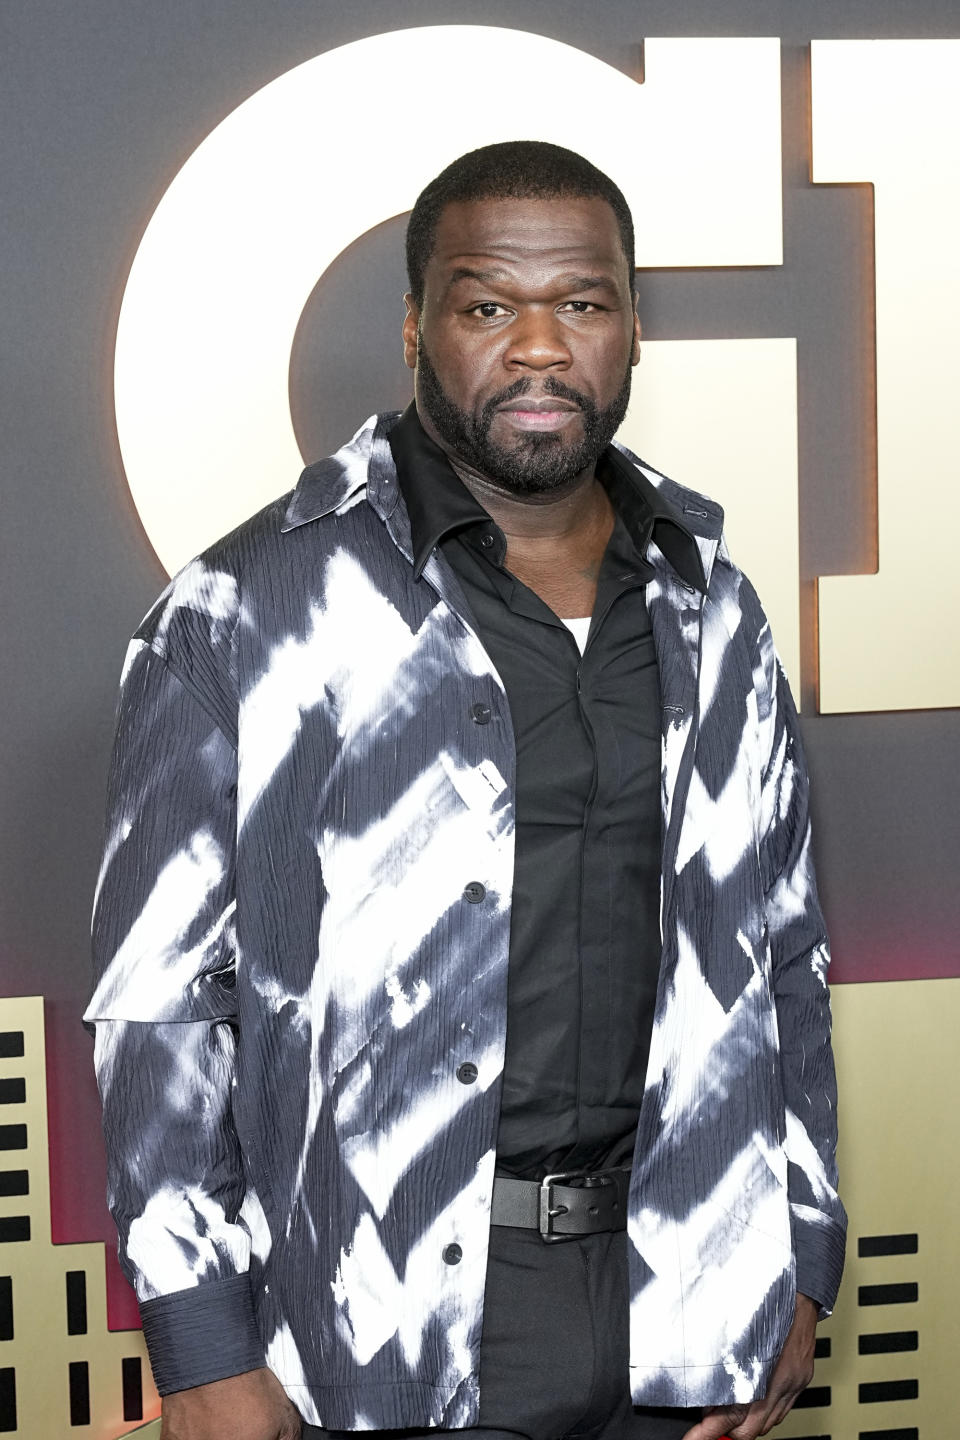 50 Cent in a tie-dye patterned jacket over a black shirt, standing in front of a promotional background